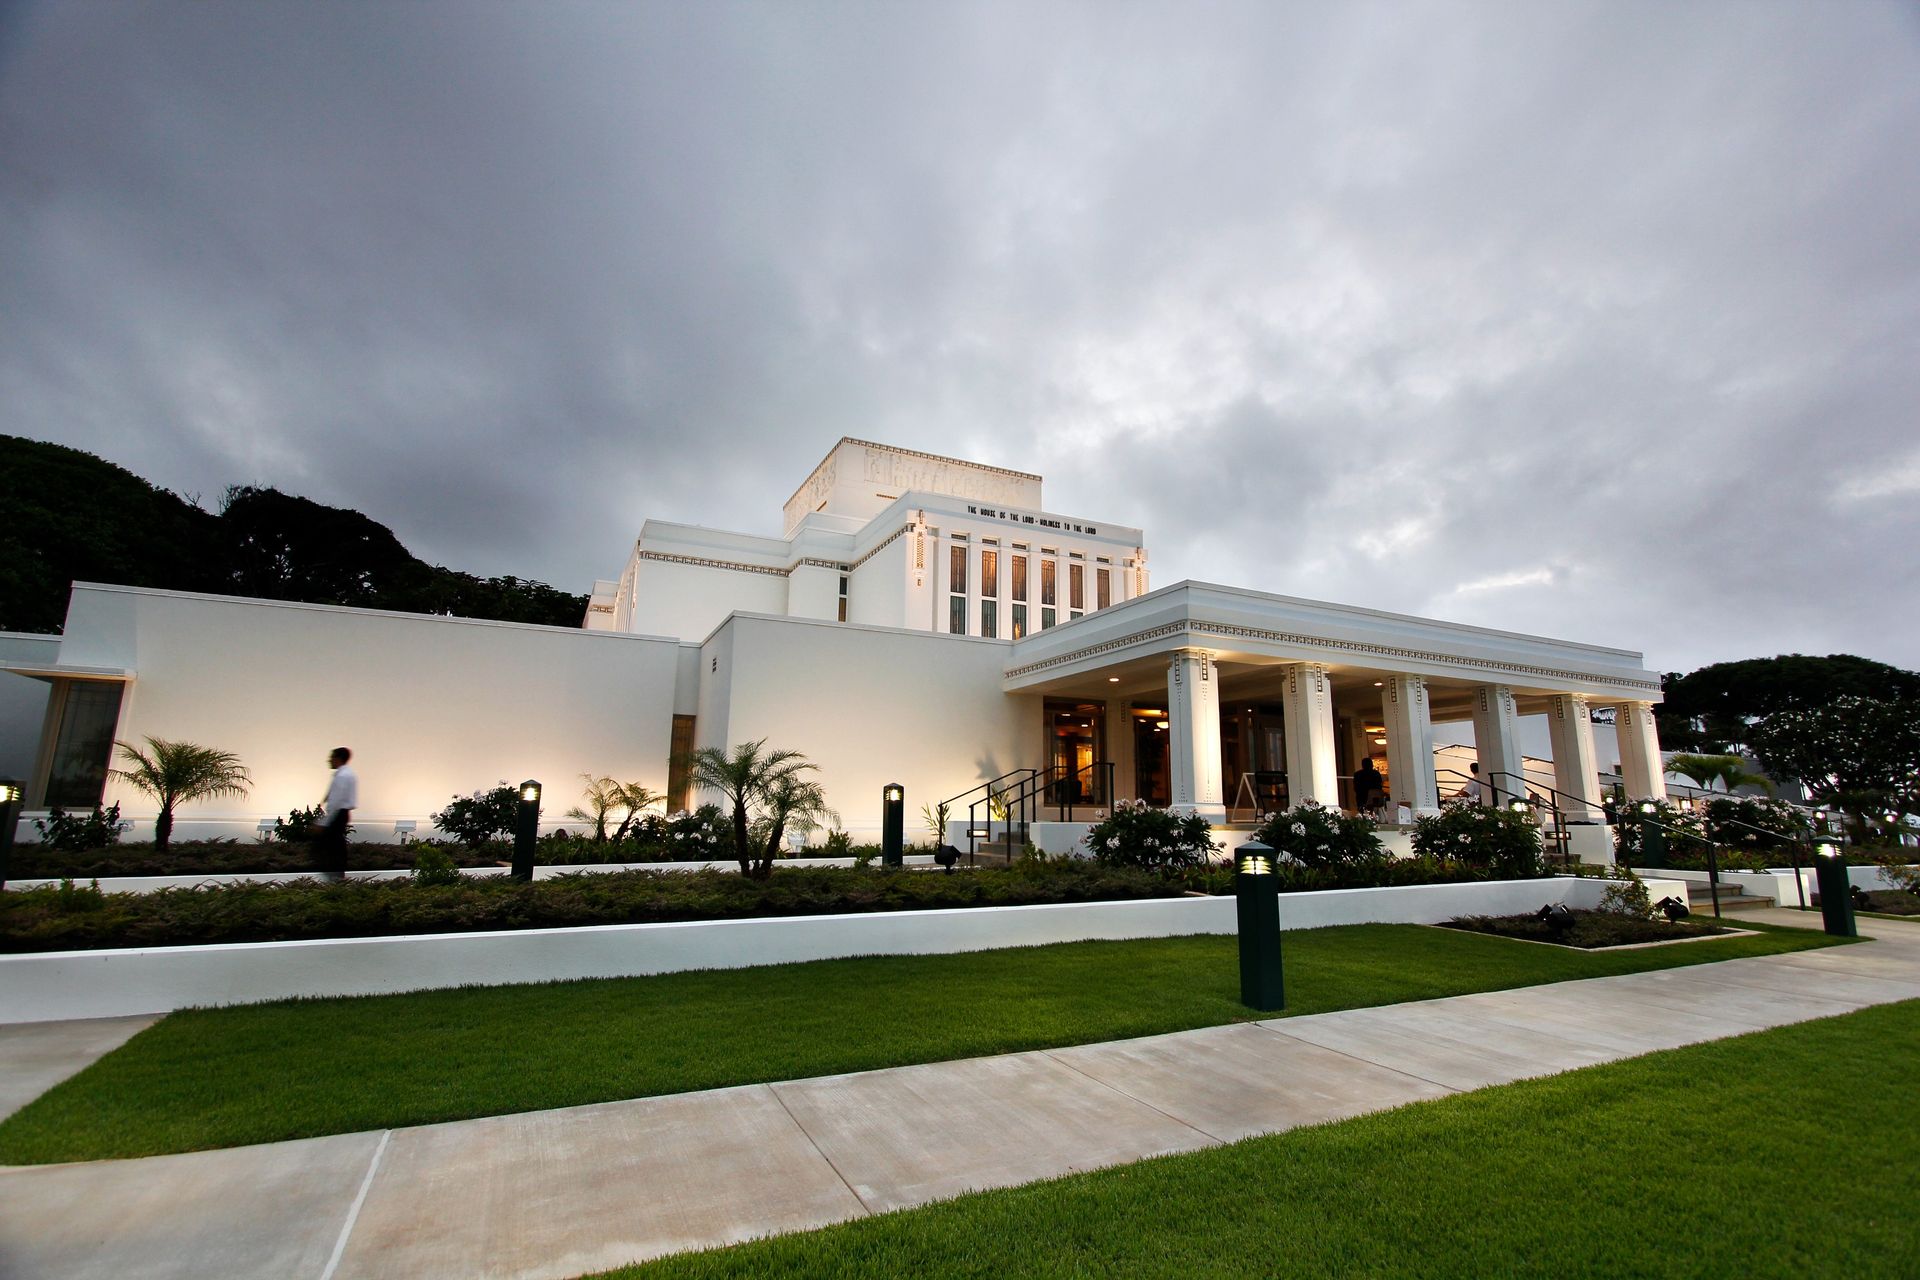 The Laie Hawaii Temple entrance, including scenery.